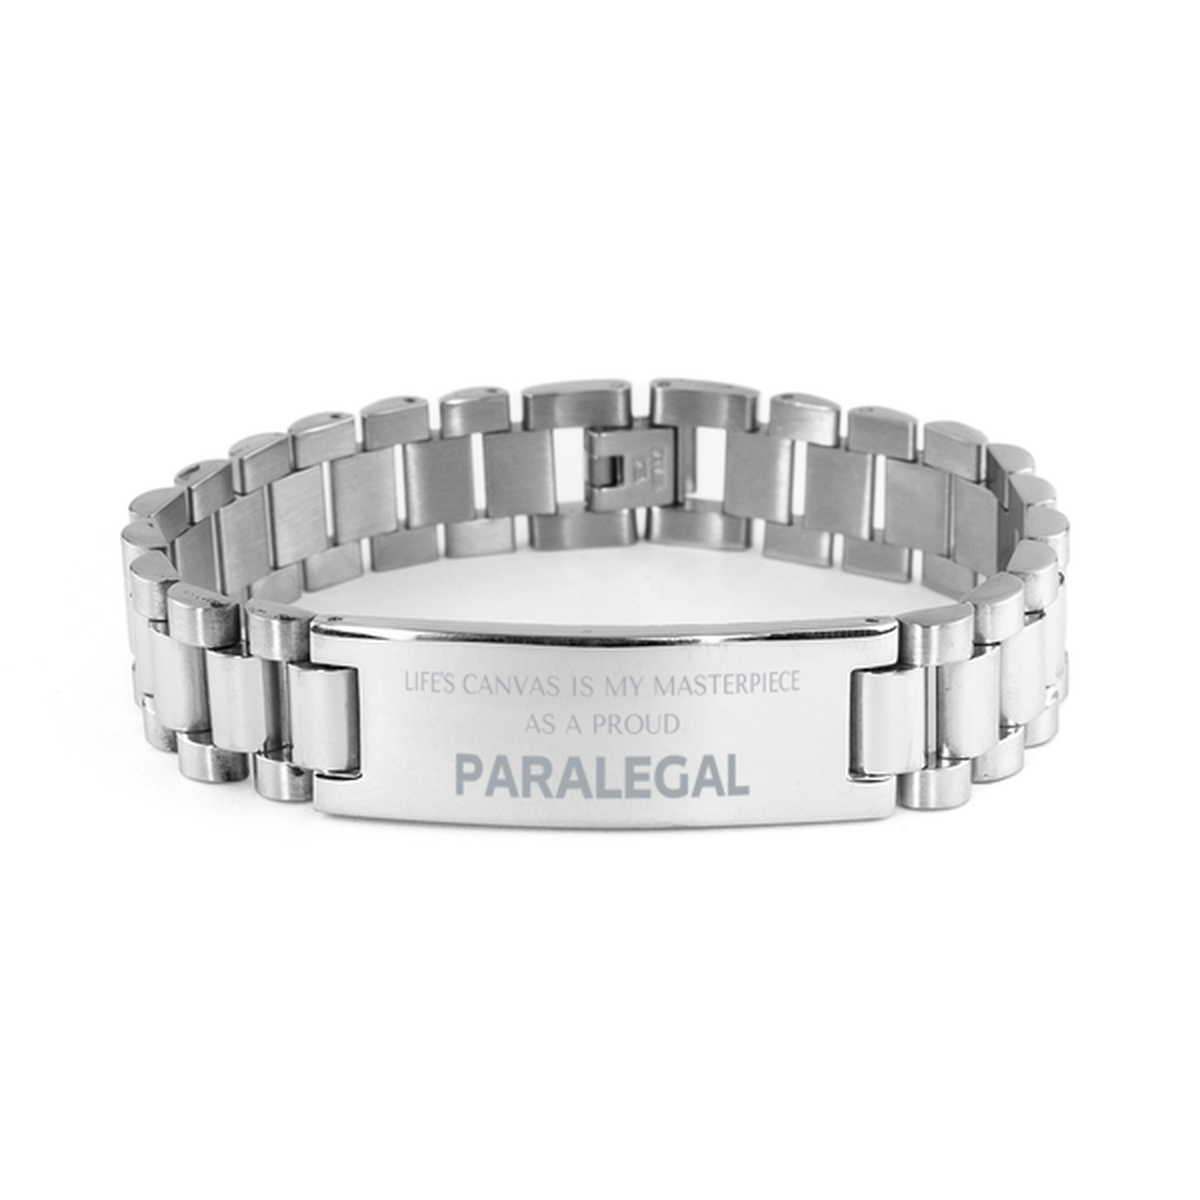 Proud Paralegal Gifts, Life's canvas is my masterpiece, Epic Birthday Christmas Unique Ladder Stainless Steel Bracelet For Paralegal, Coworkers, Men, Women, Friends